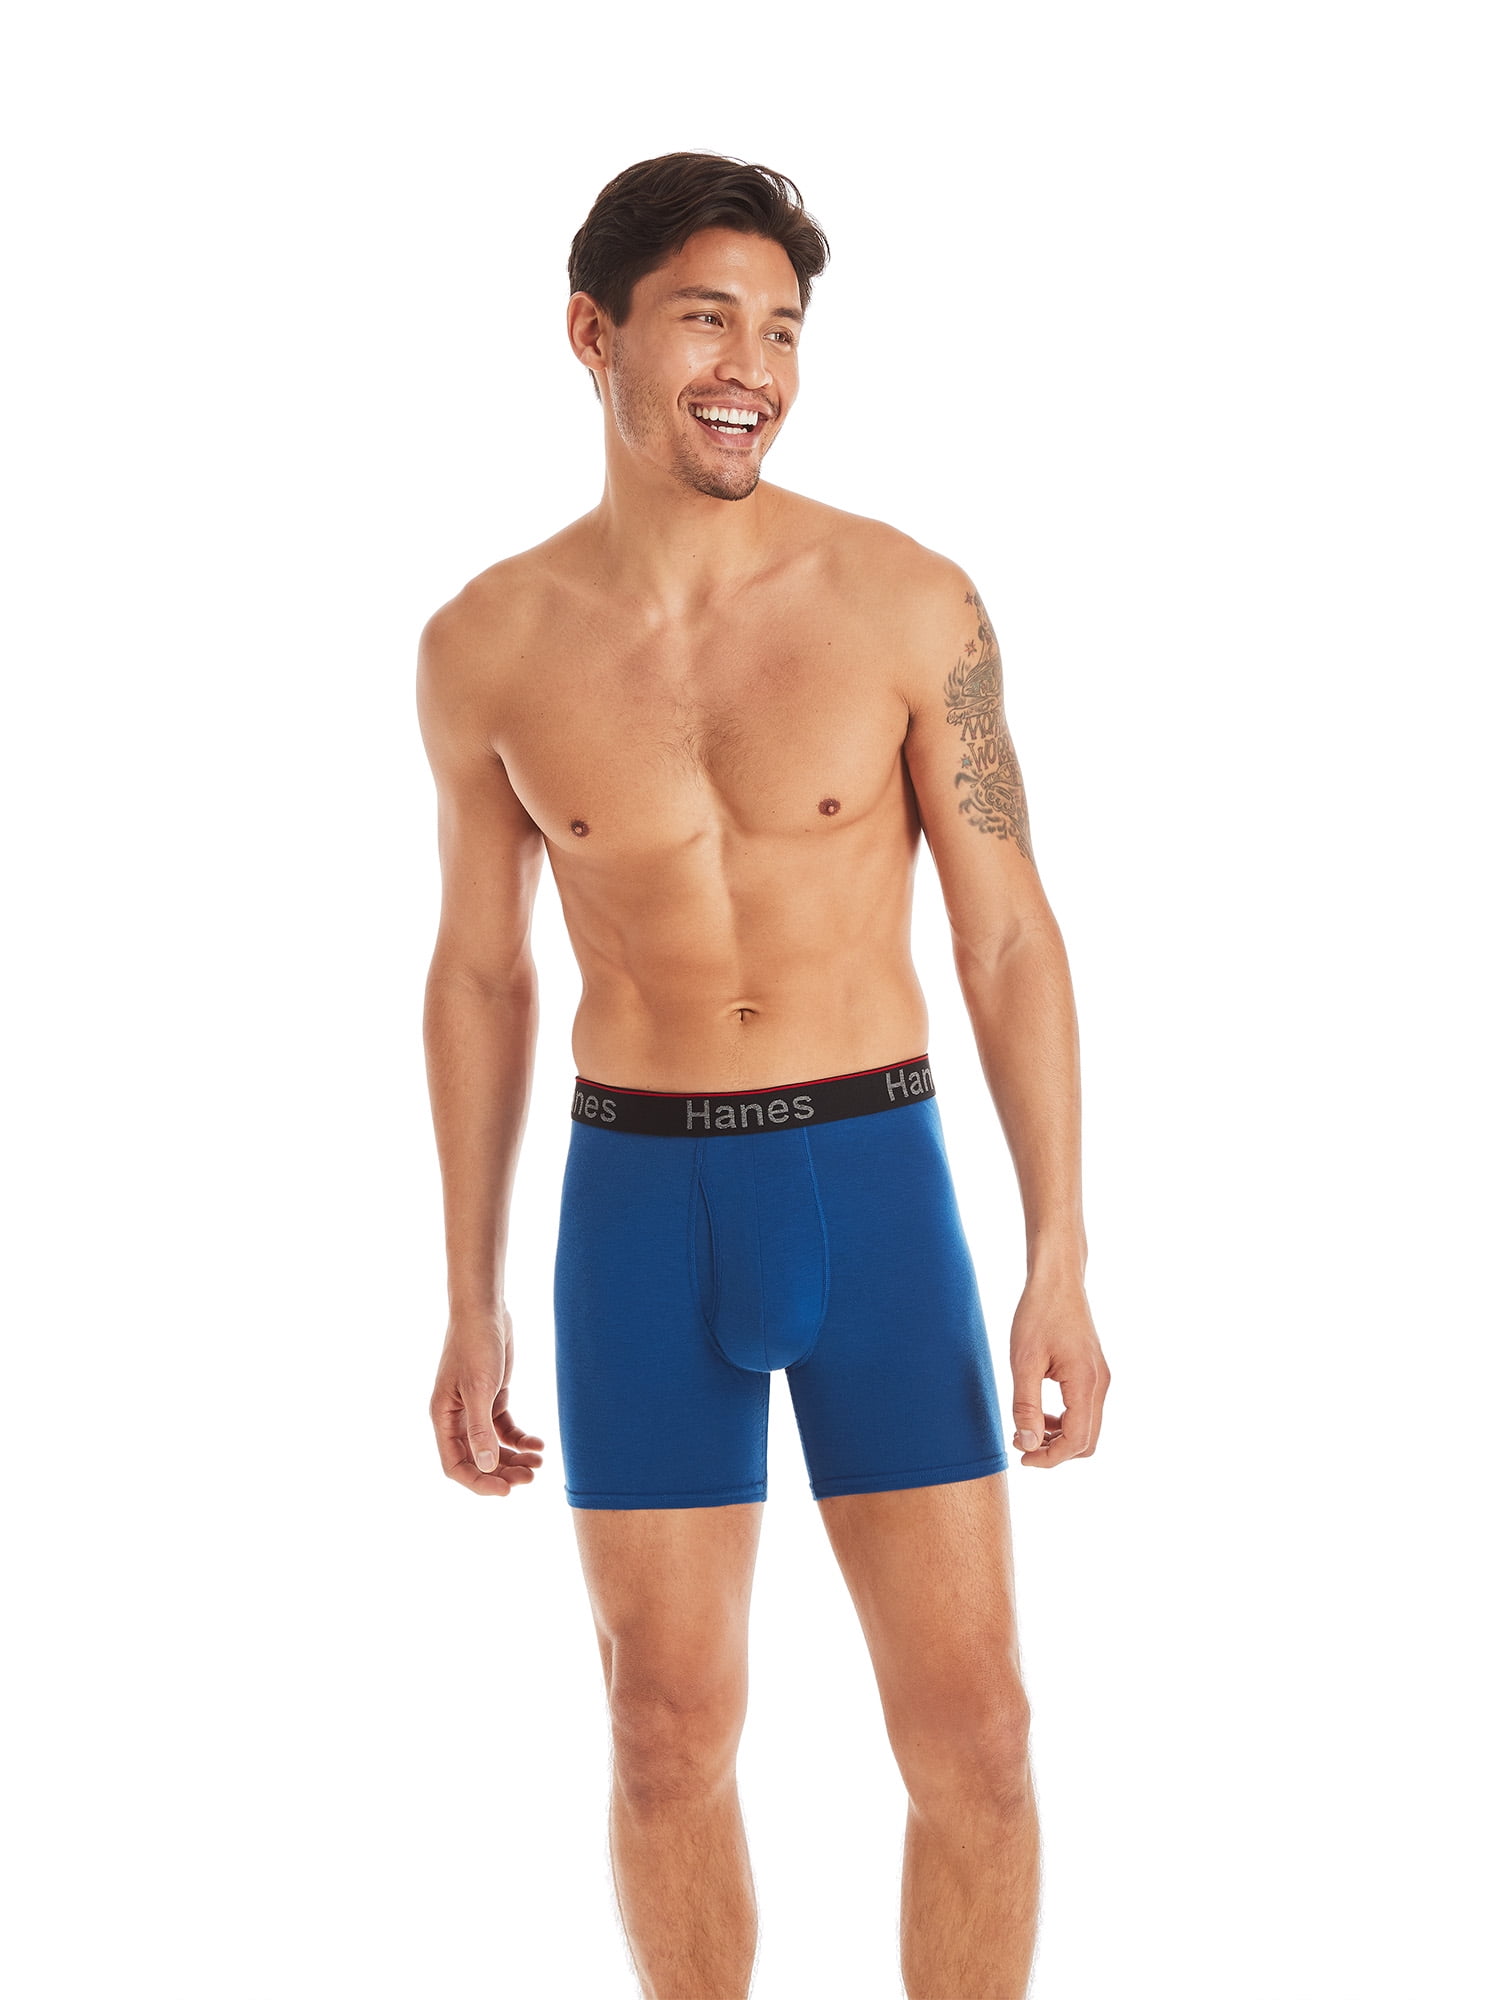 Hanes Men's X-Temp Total Support Pouch Boxer Briefs With, 48% OFF